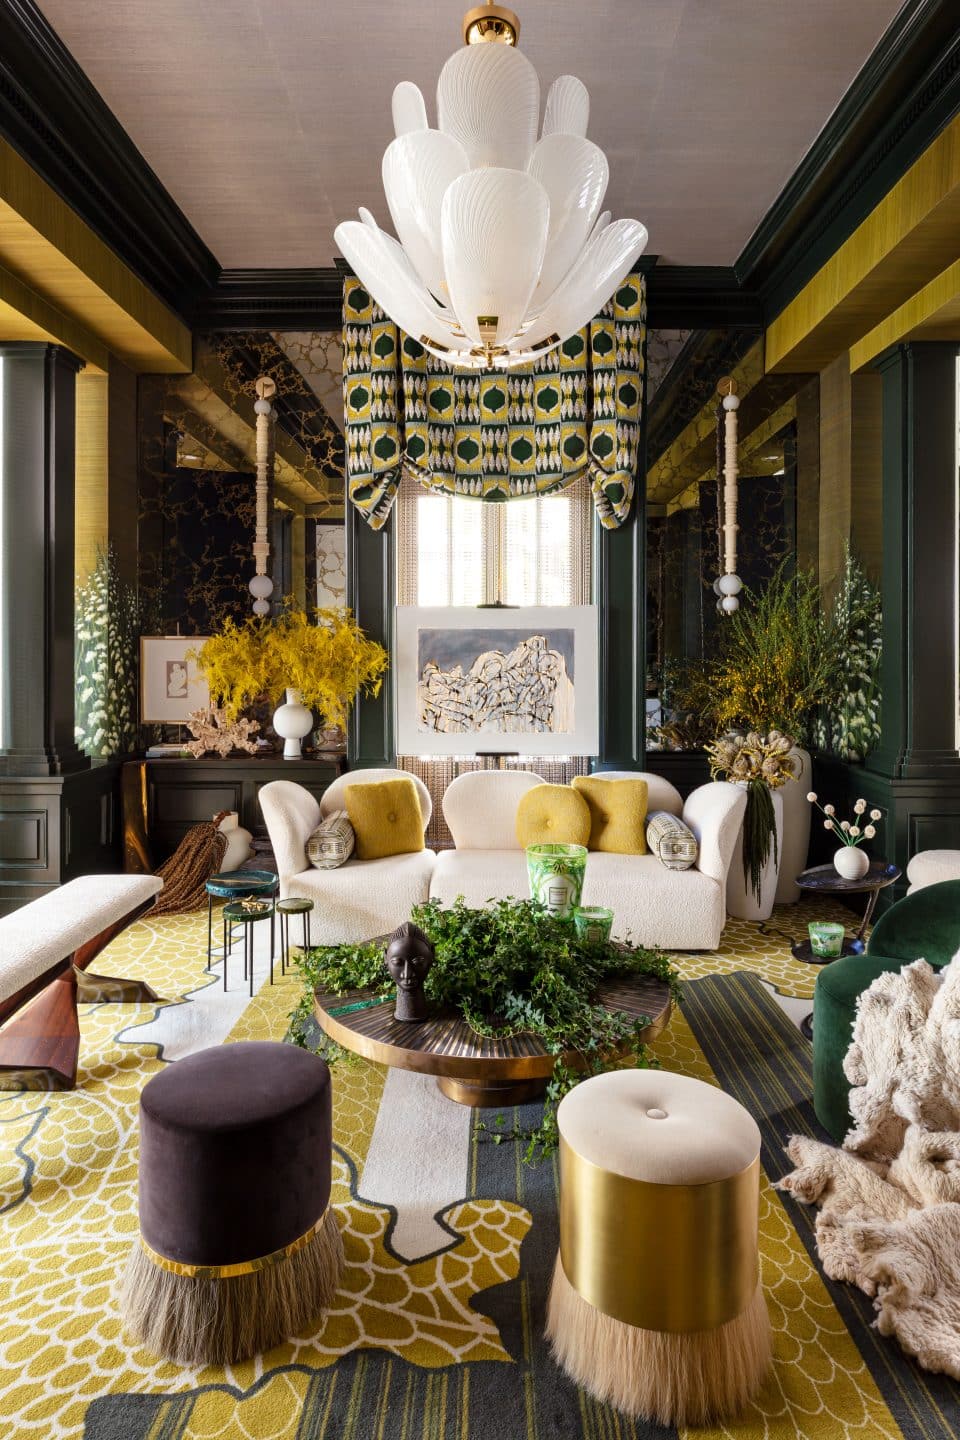 Vibrant, Nature-Inspired Design Blossoms at This Year’s Kips Bay Decorator Show House